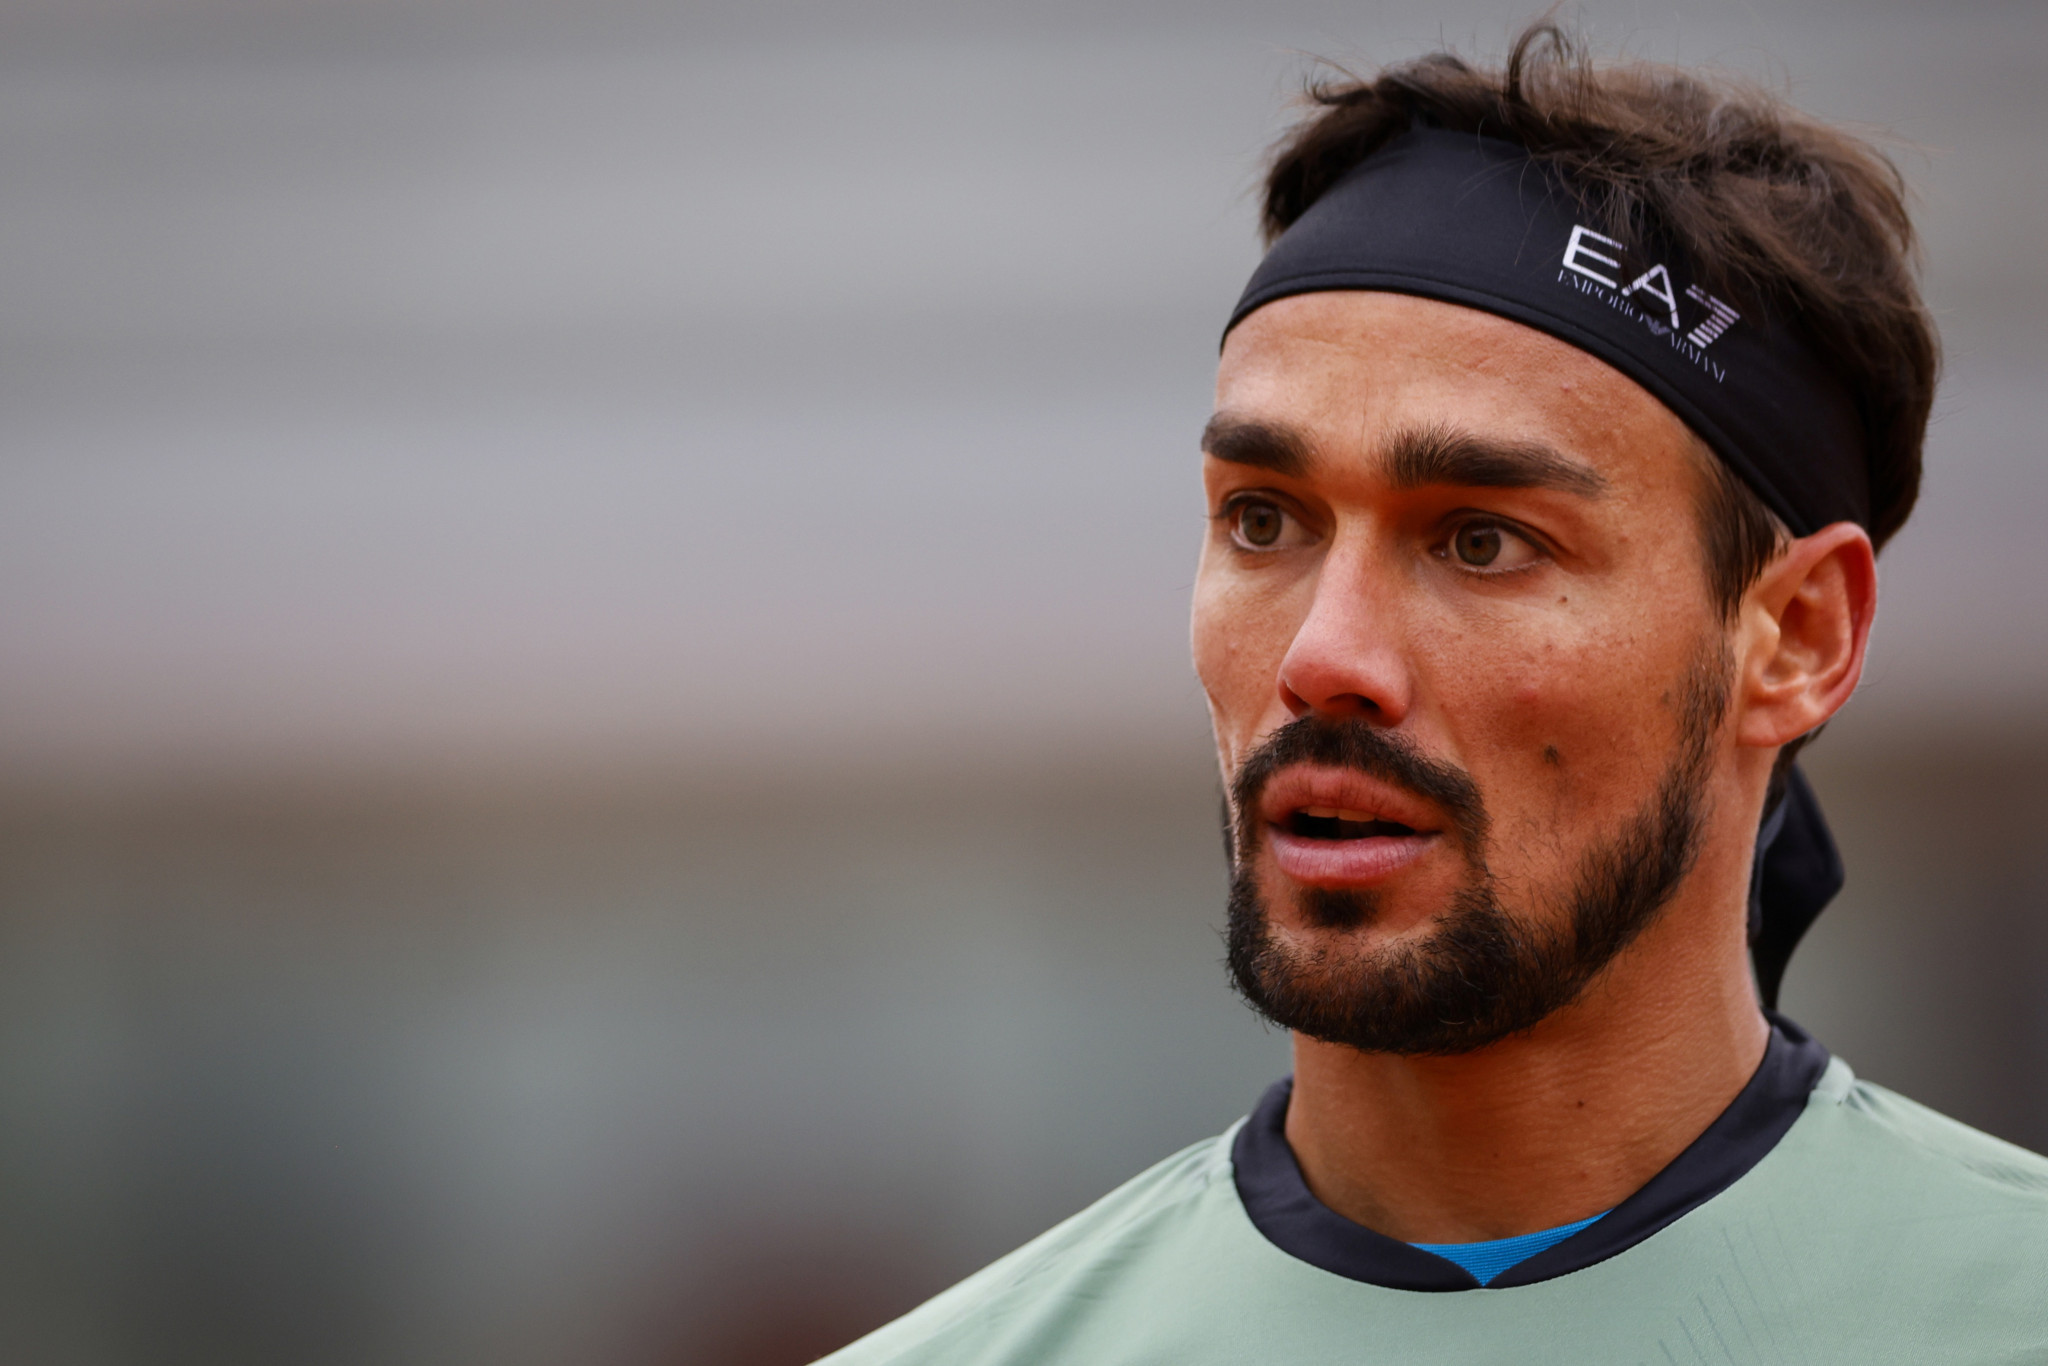 Italy's 15th seed Fabio Fognini continued his poor form since the tennis restart with a defeat to unseeded Kazakh Mikhail Kukushkin ©Getty Images